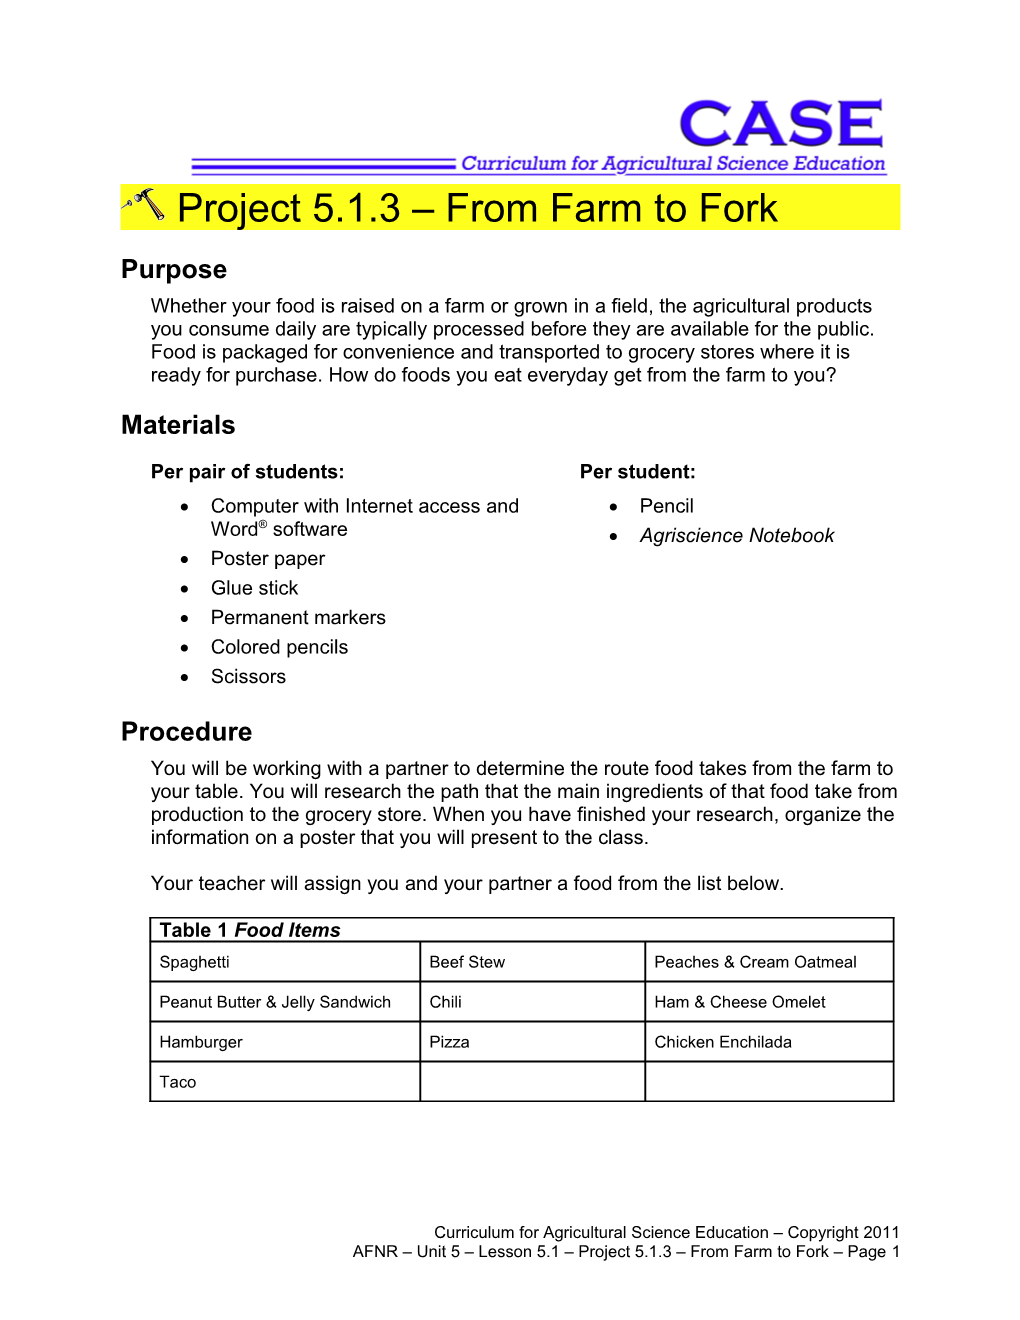 Project 5.1.3 from Farm to Fork